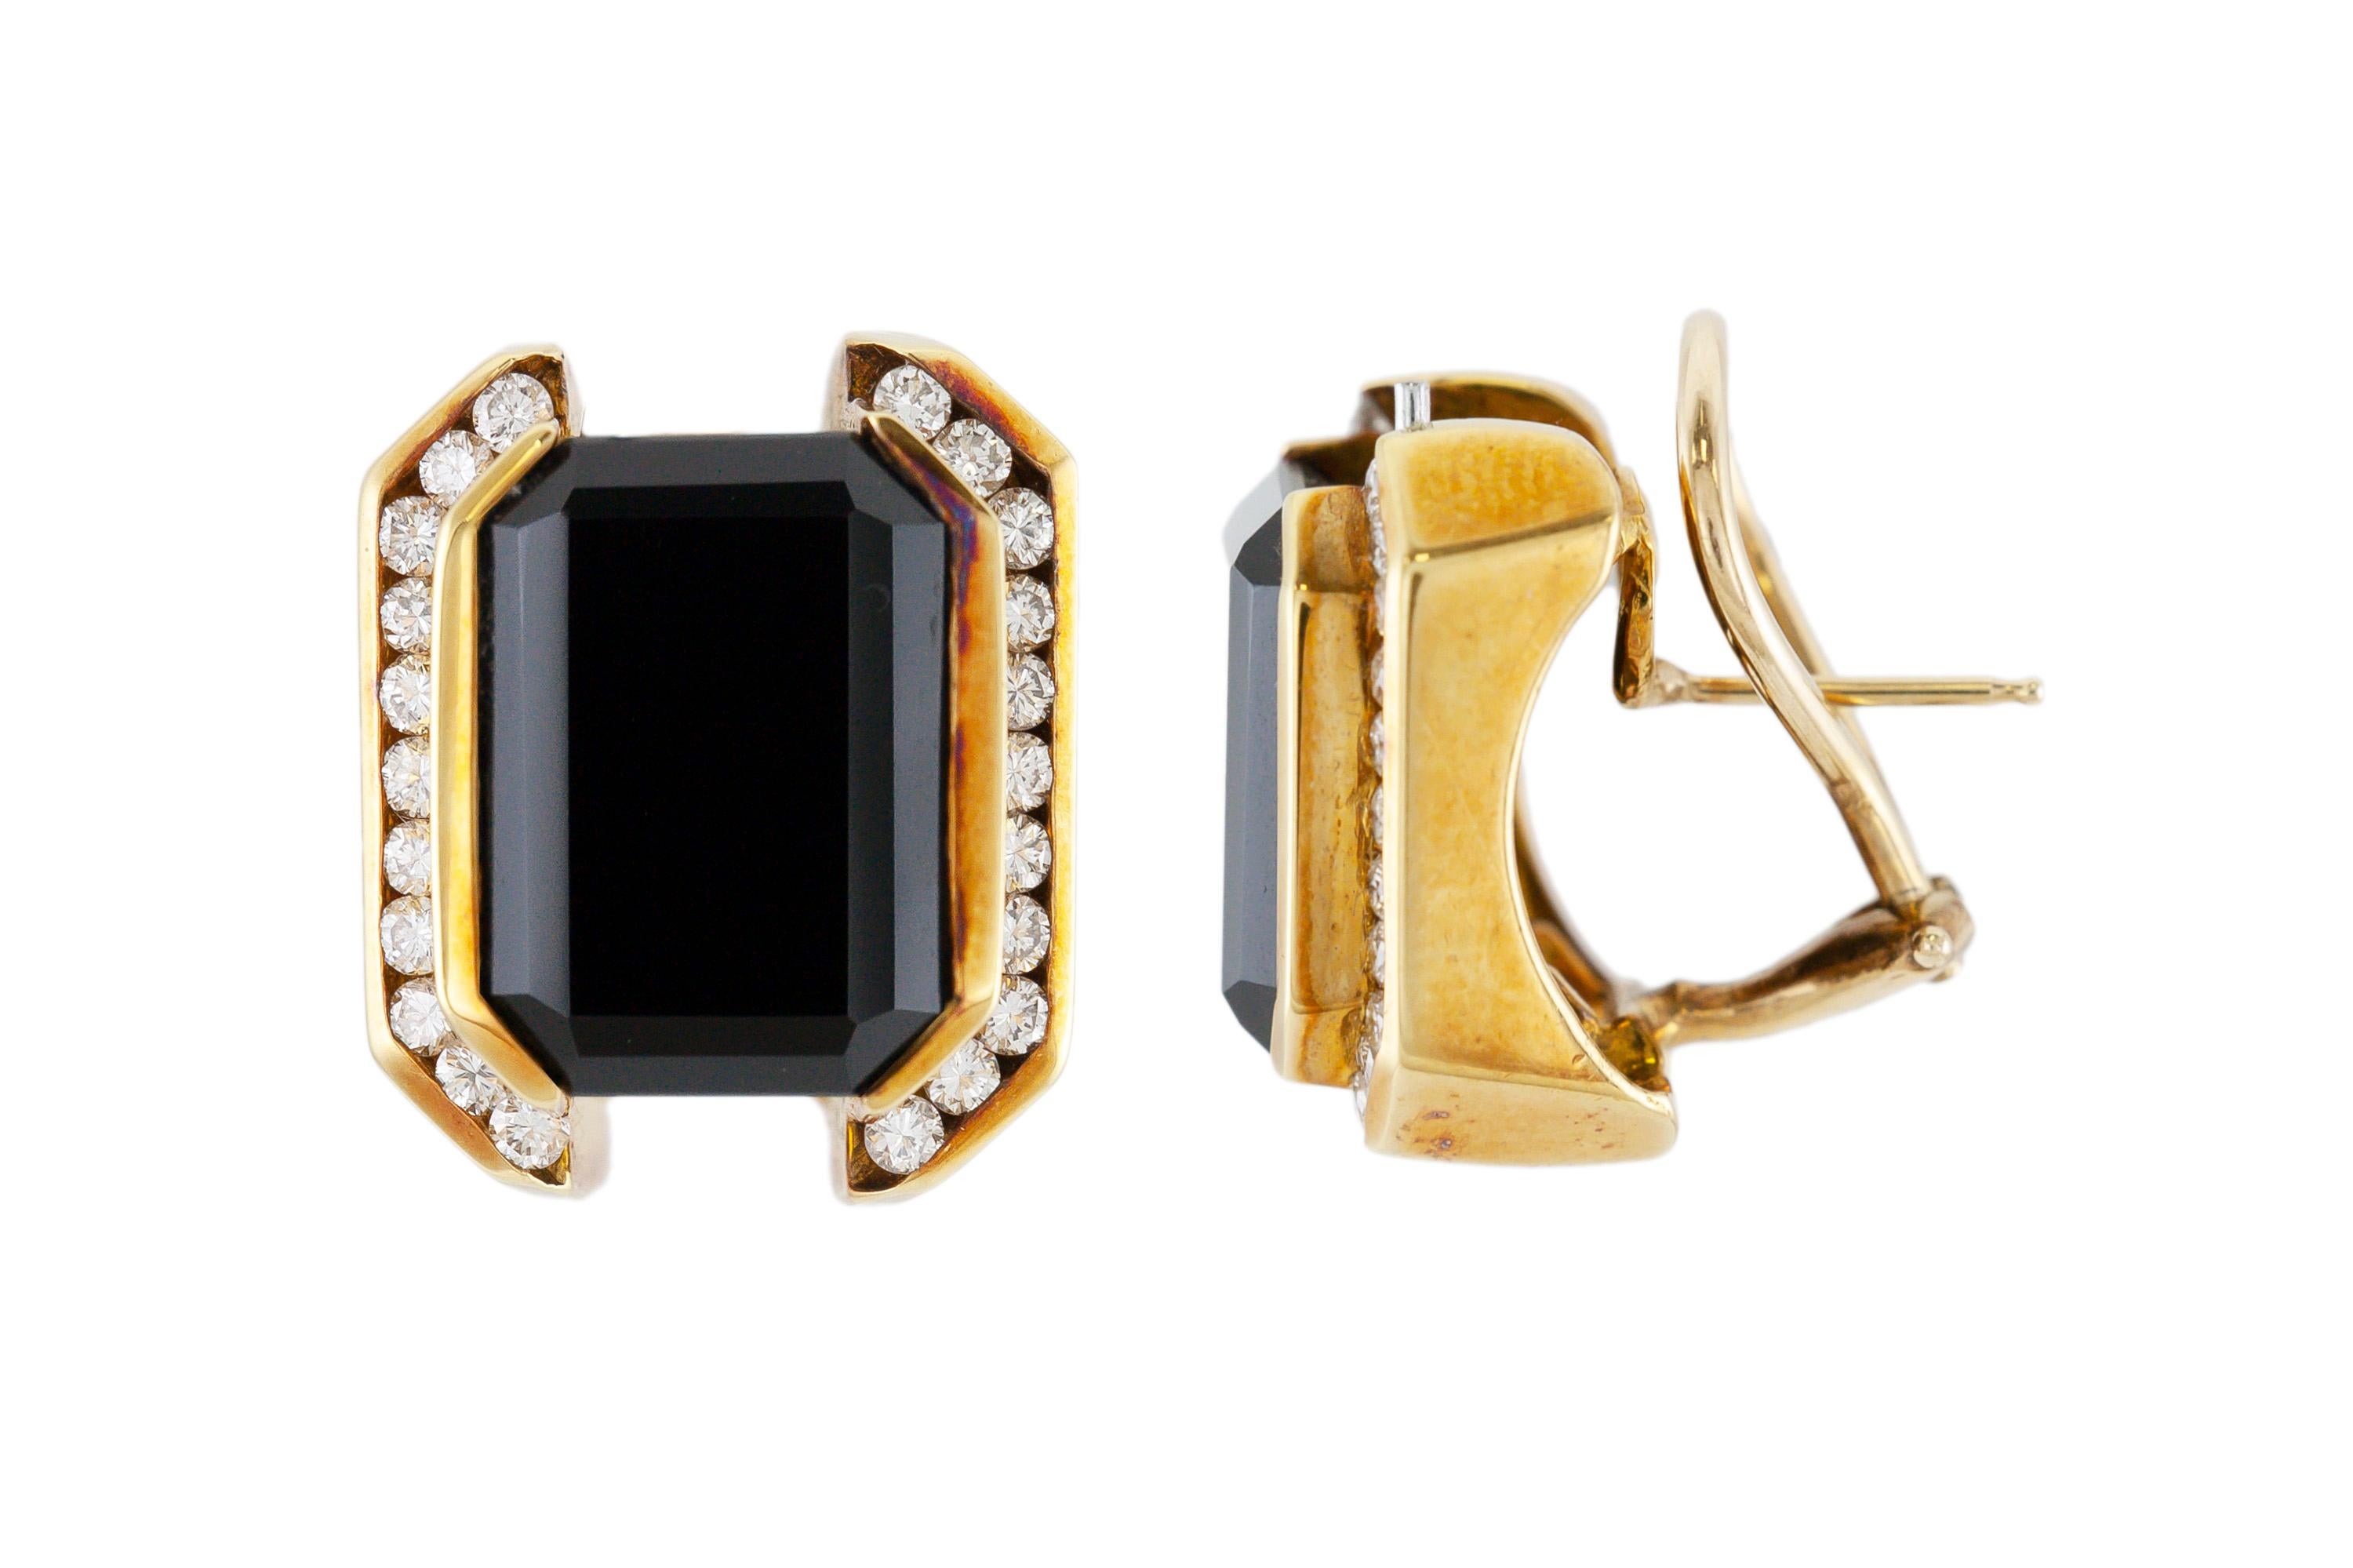 The earrings are finely crafted in 14k yellow gold with emerald cut onyx and round diamonds weighing approximately a total of 1.00 carat. Circa 1940.